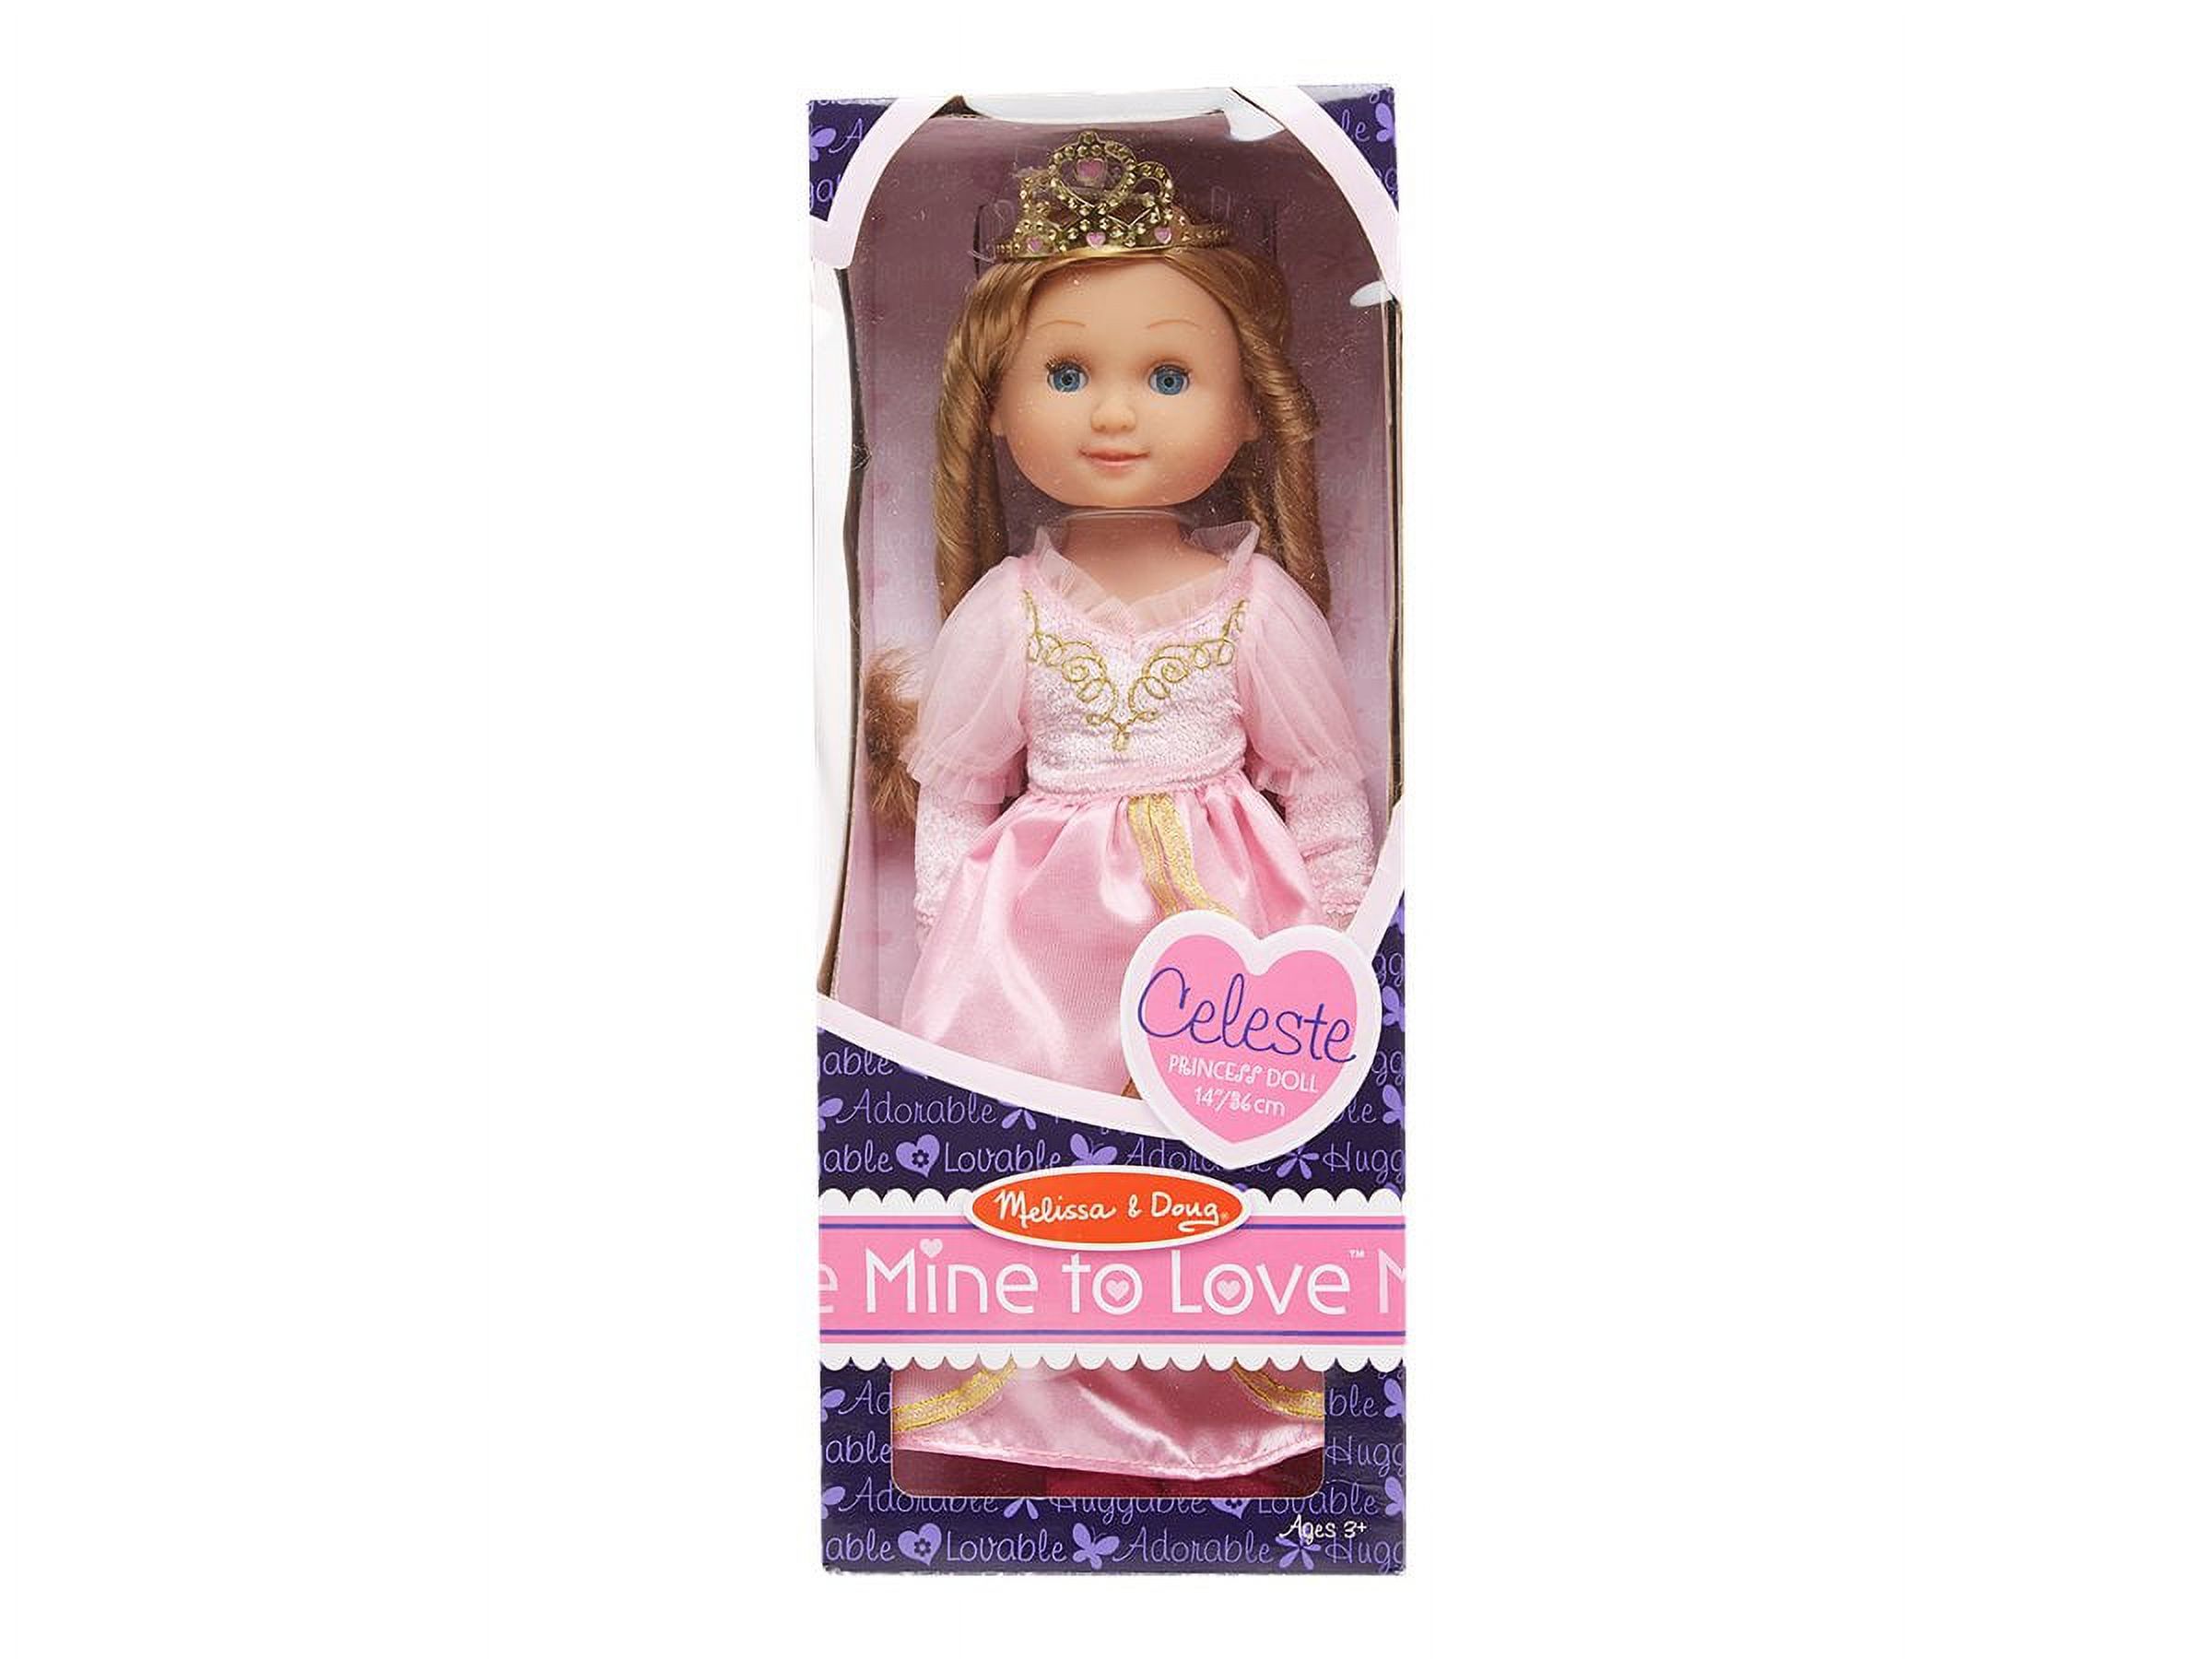 Melissa & Doug Celeste 14-Inch Poseable Princess Doll With Pink Gown and Tiara - image 1 of 2